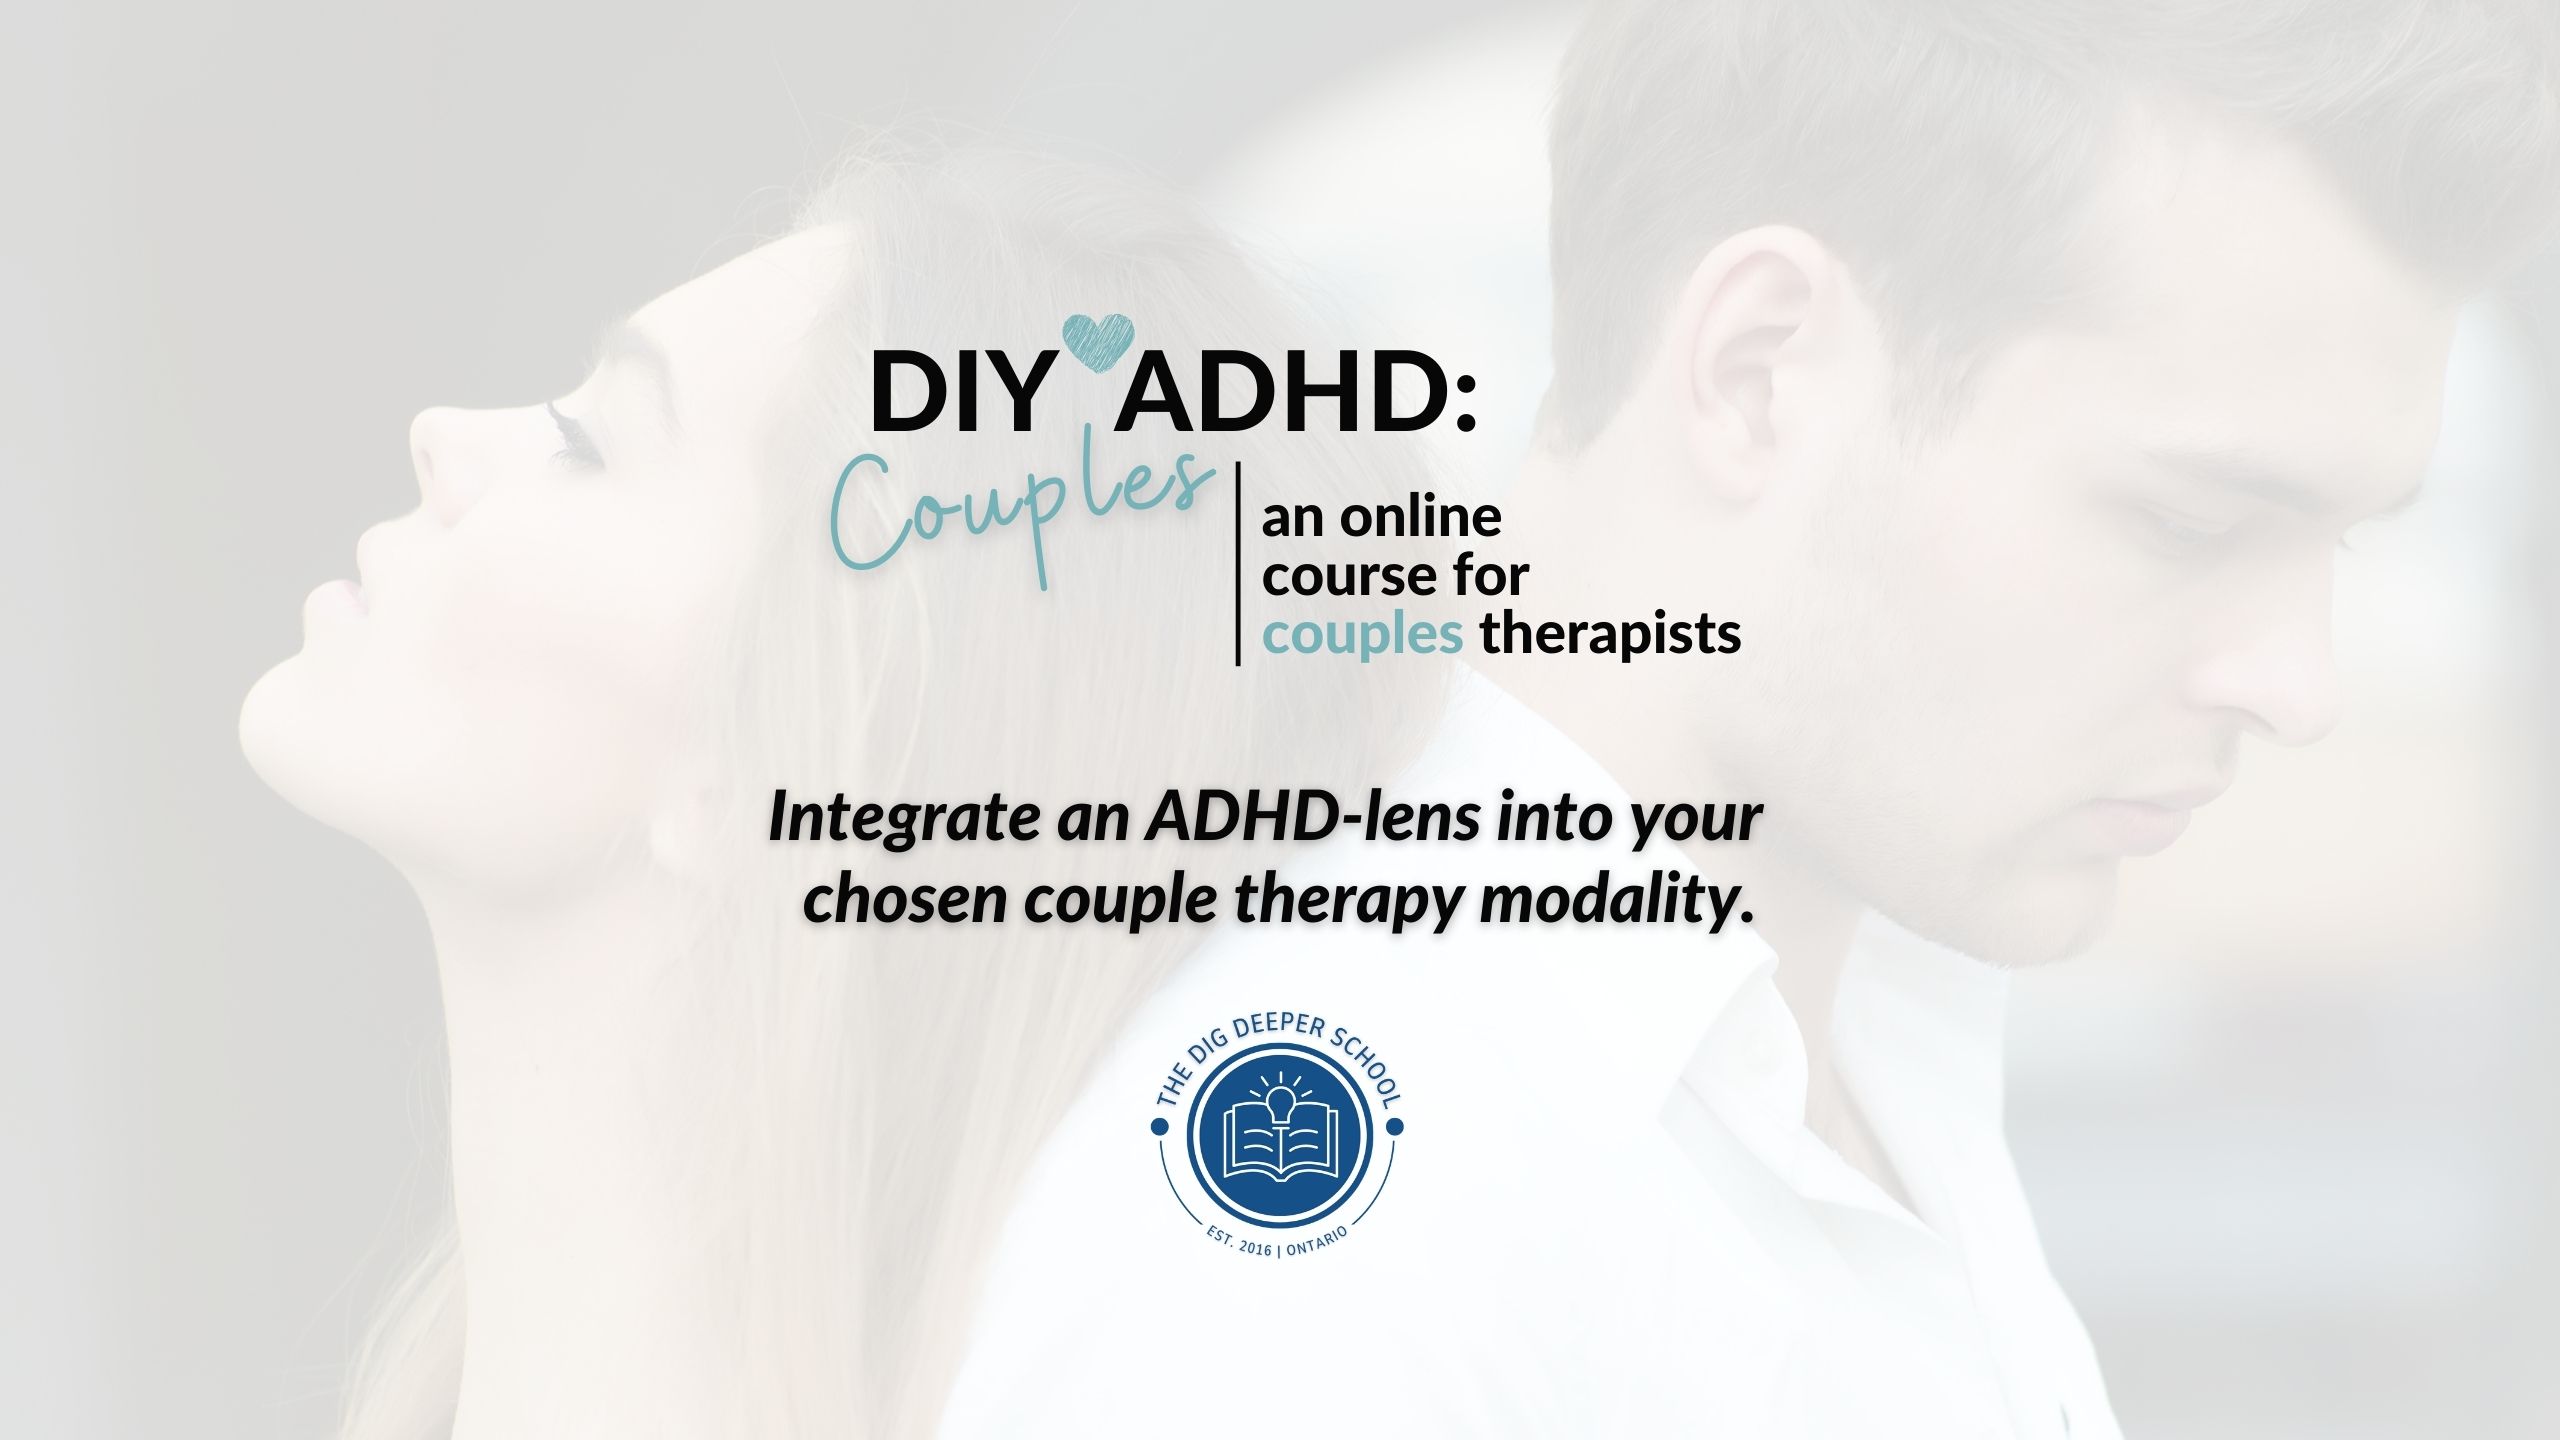 DIY*ADHD: Couples, an online course for couple therapists